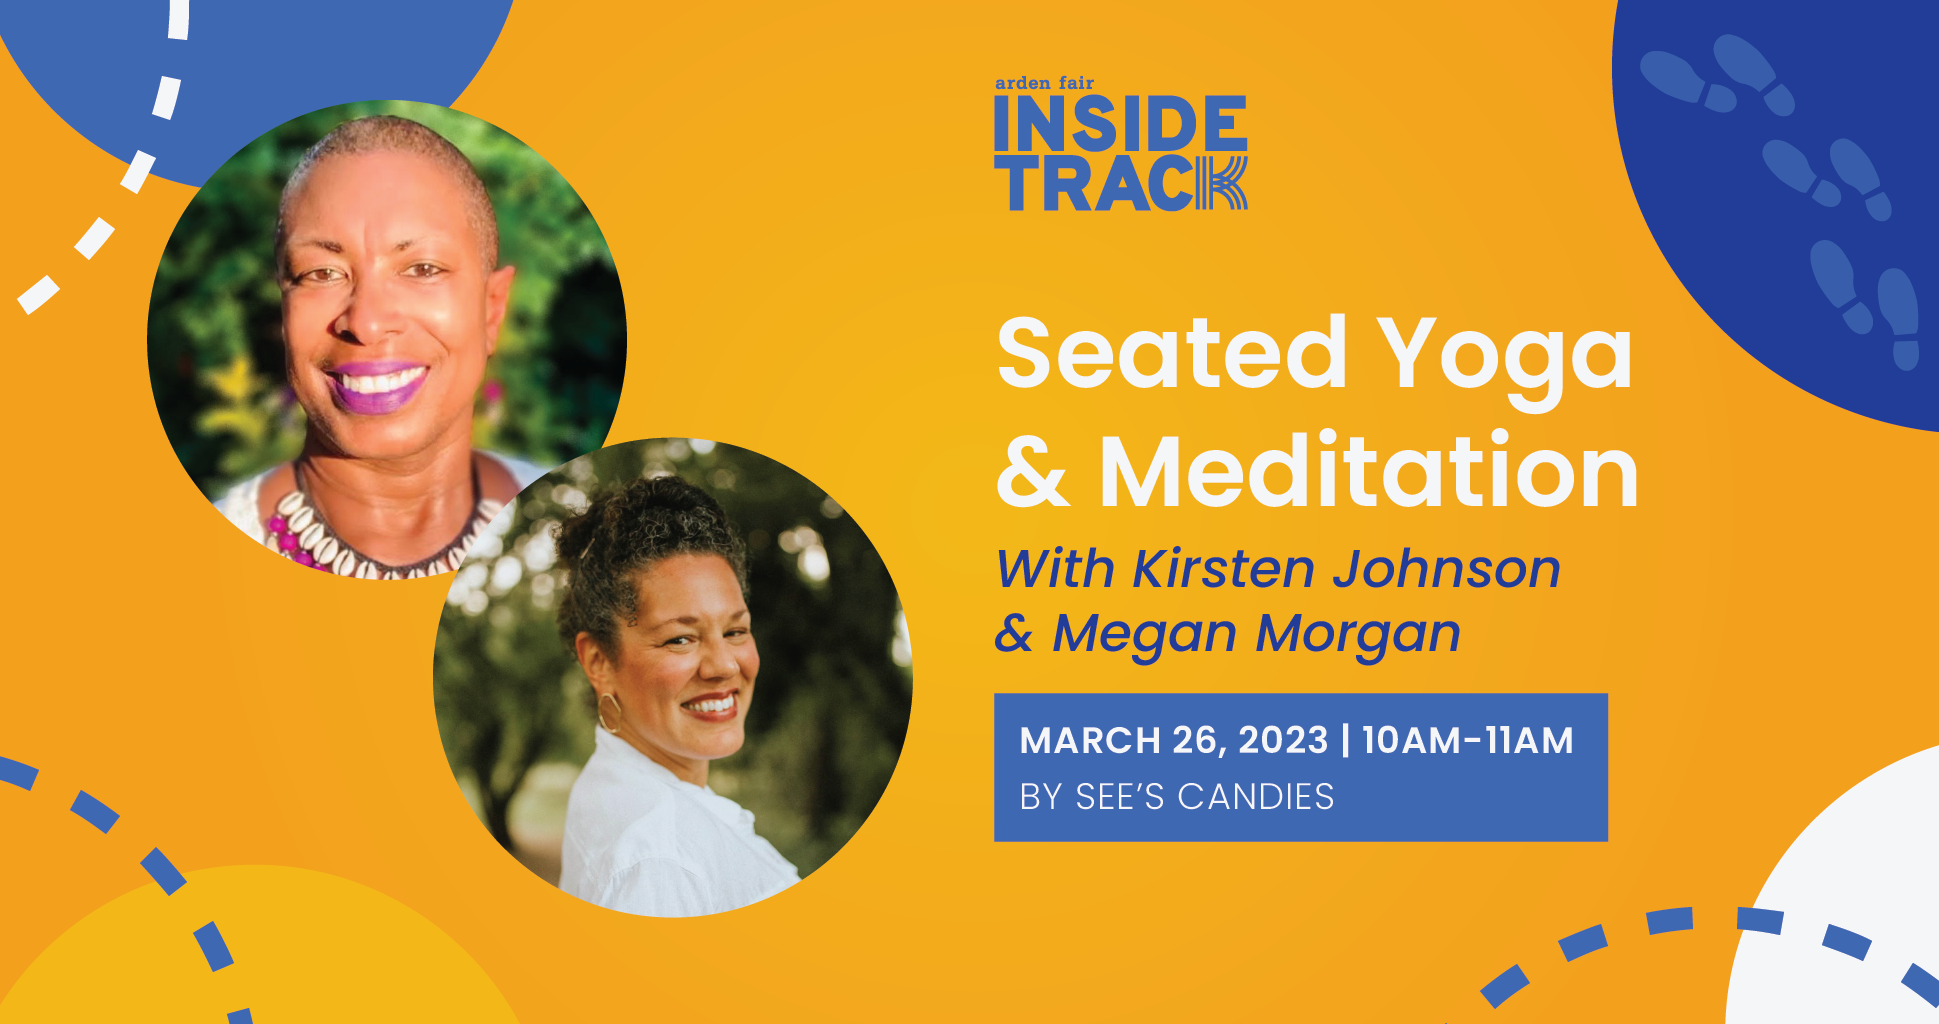 Yellow background with blue and white design elements. Two photos of women's faces smiling. Copy reads Arden Fair Inside Track seated yoga and meditation with Kirsten Johnson and Megan Morgan March 26 2023 10am to 11am by See's Candies.